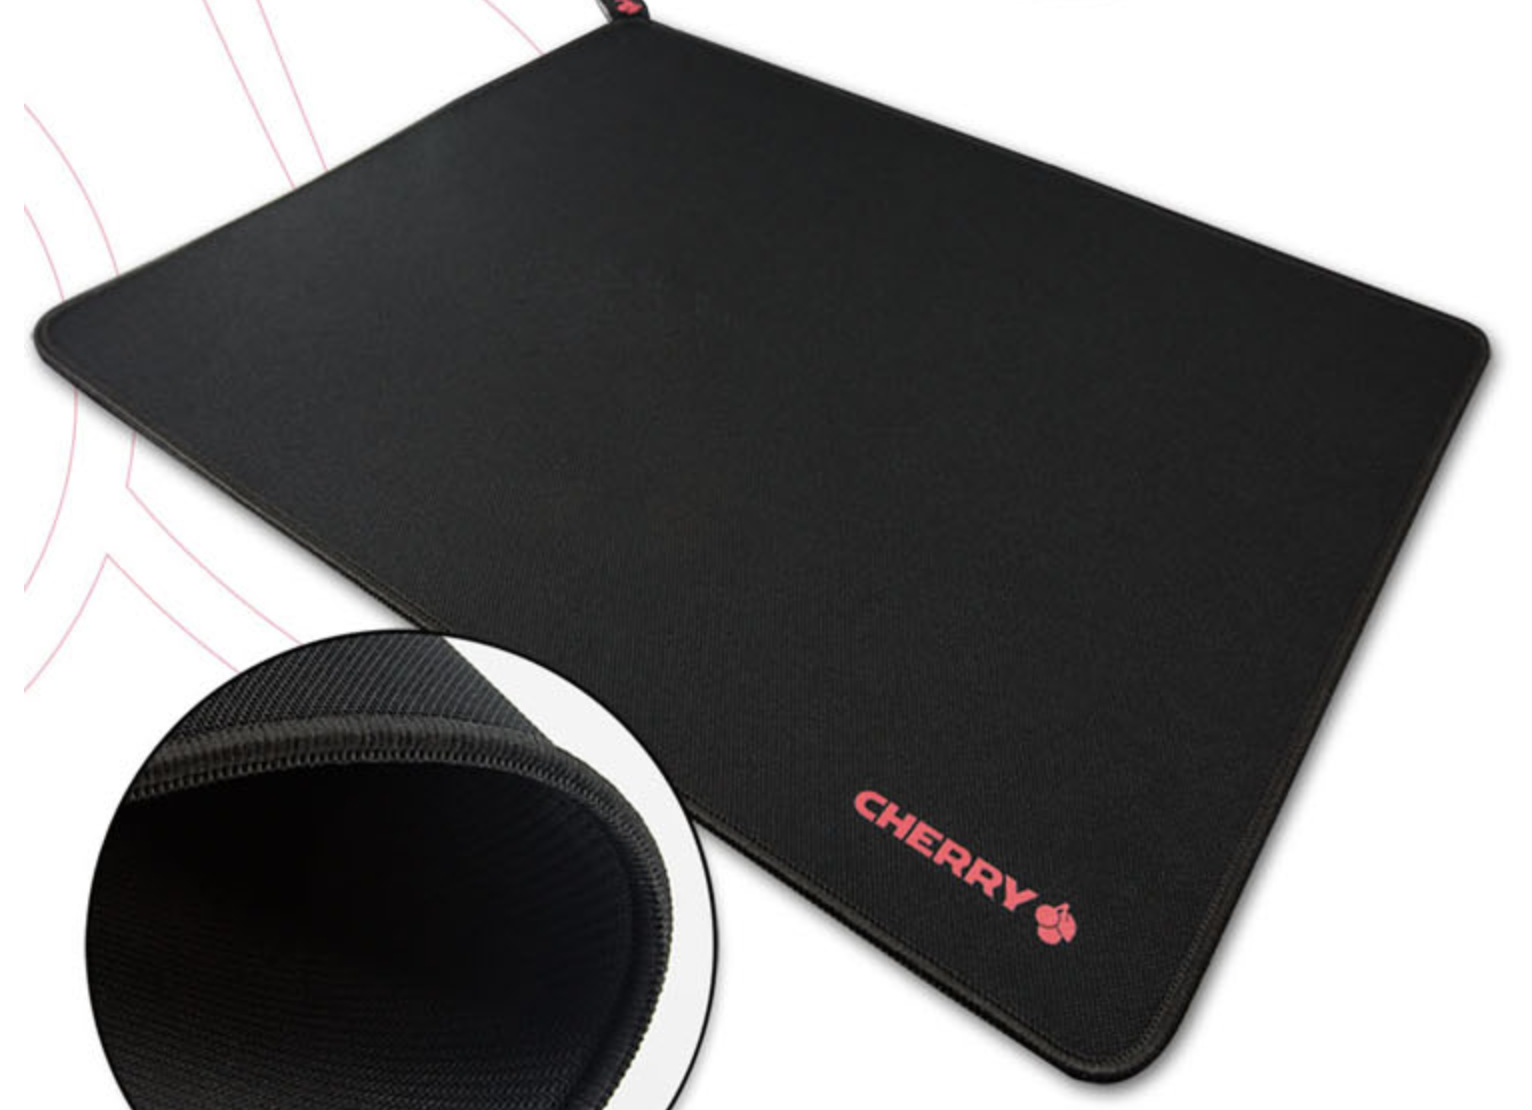 Slowly take inventory丨The six most worth buying gaming mouse pads in 2019